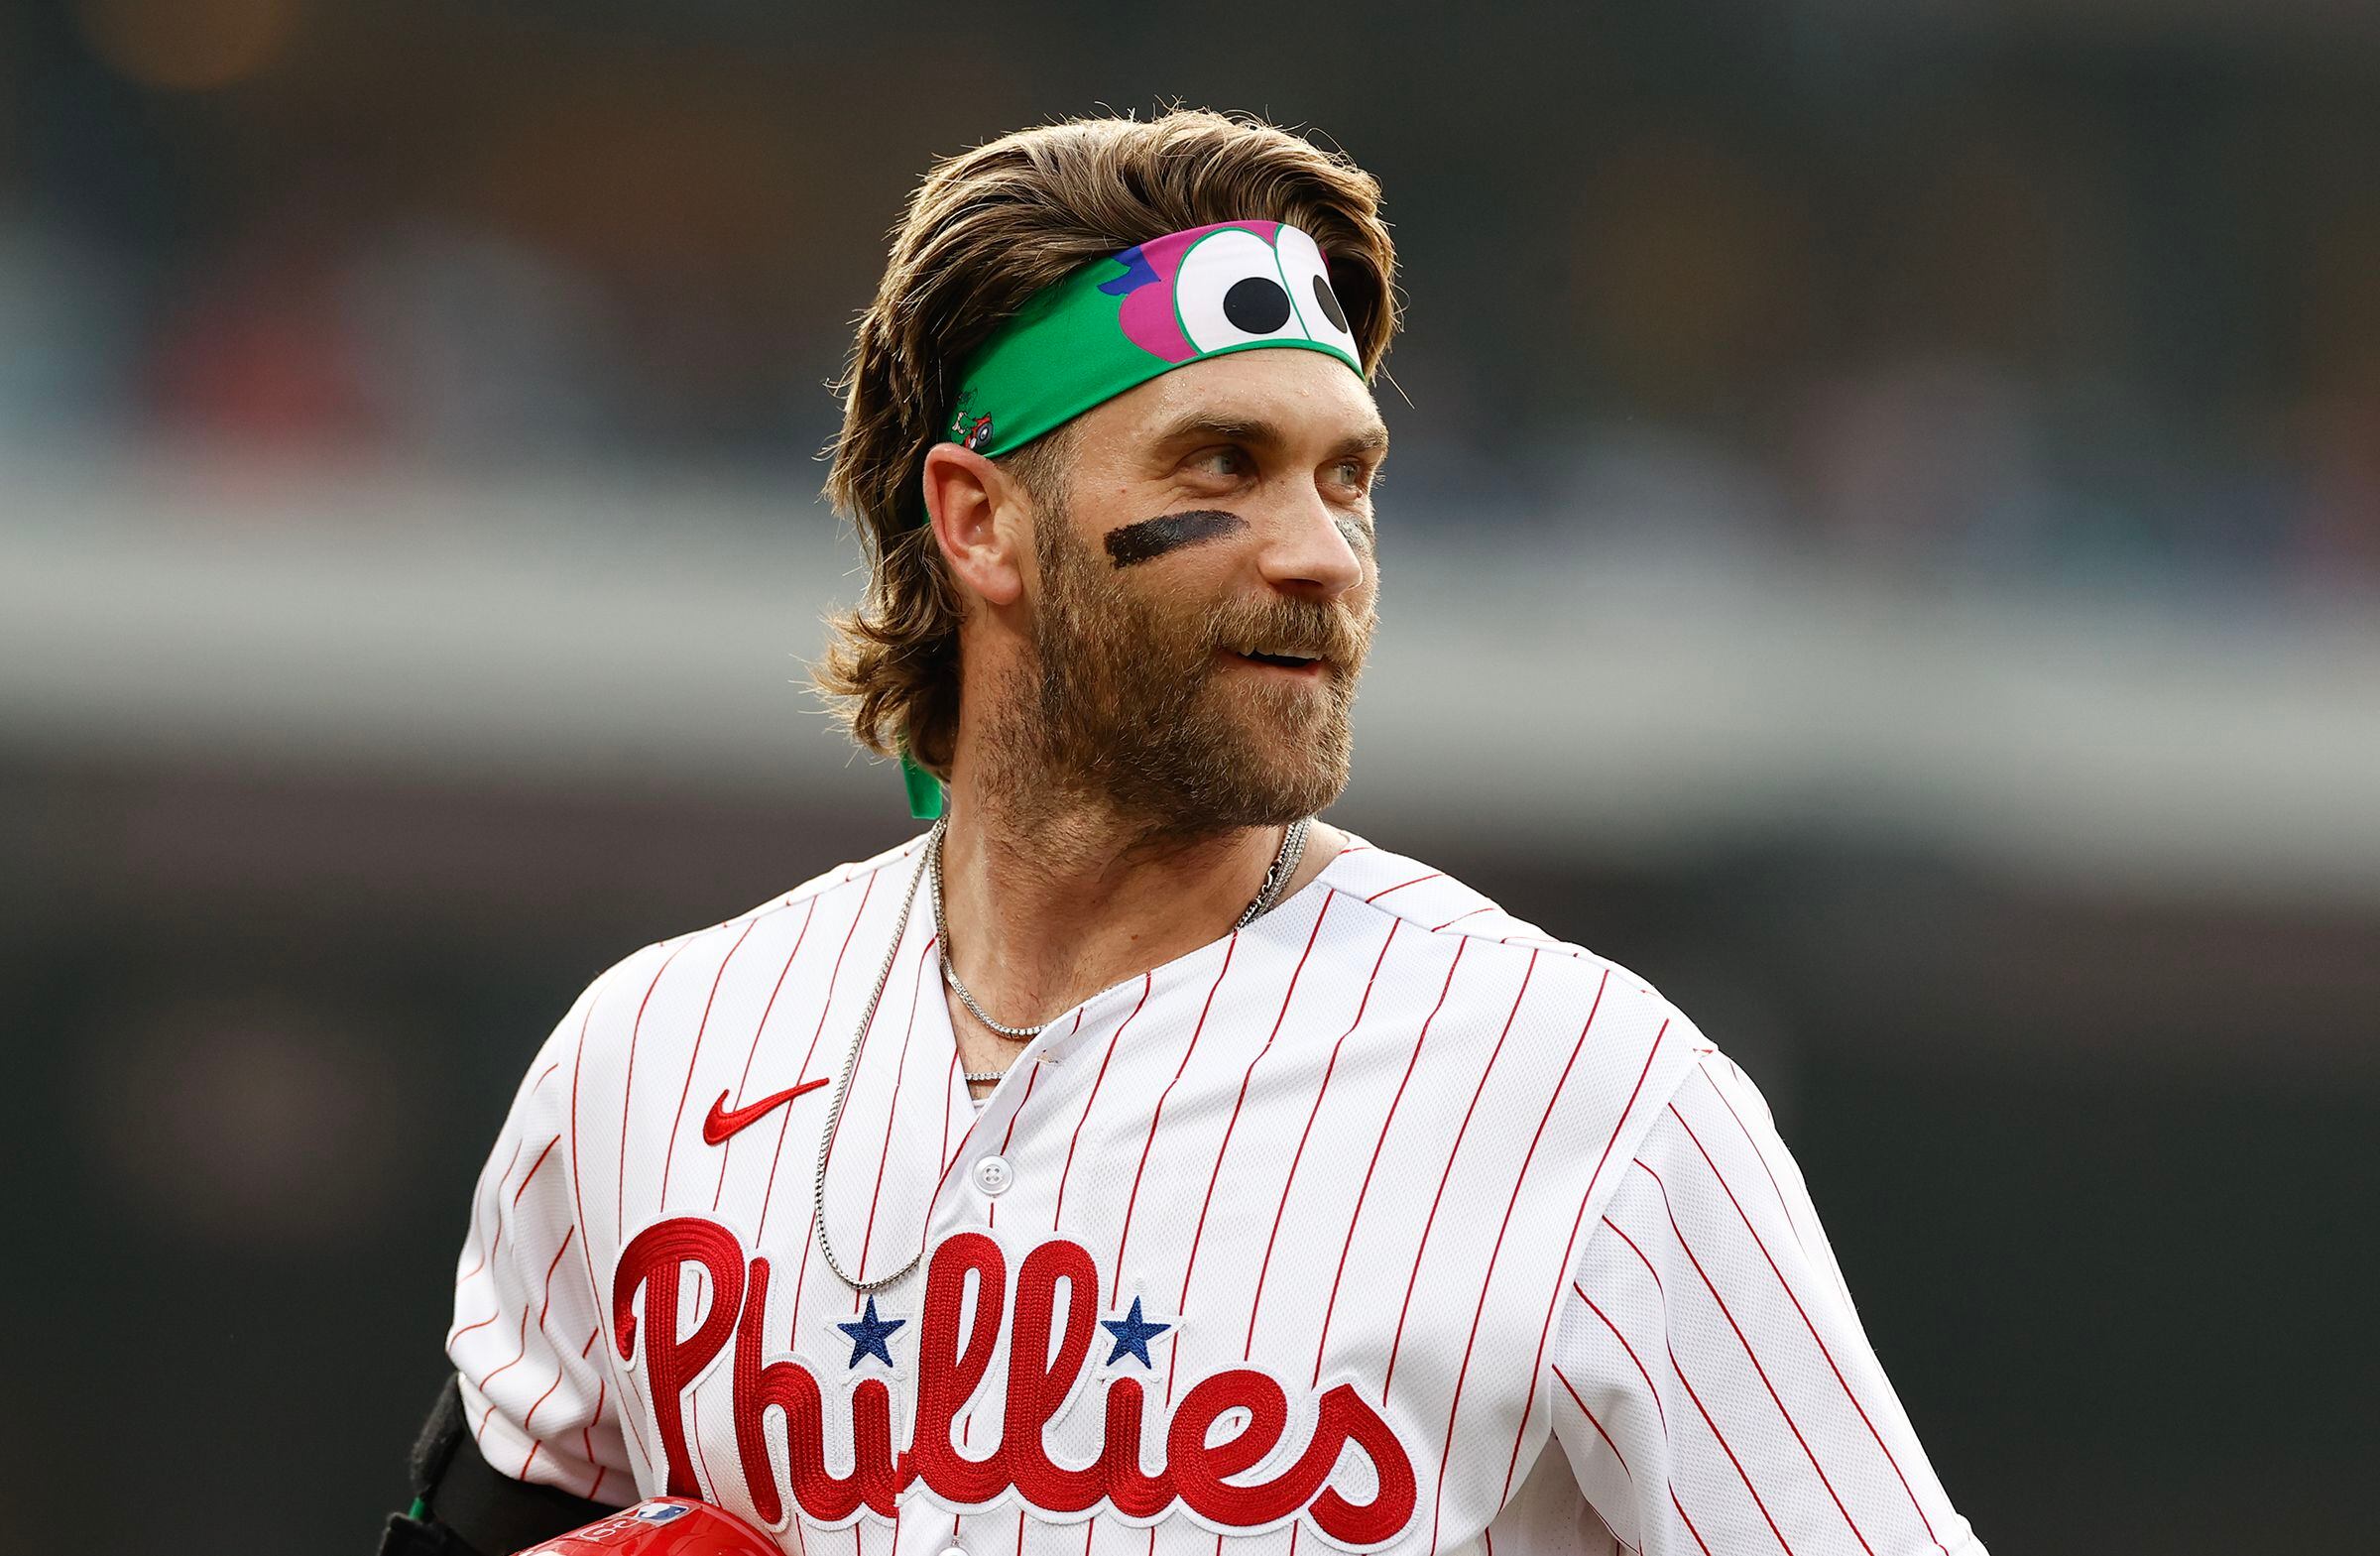 Celebrate America's bicentennial again with the Phillies and Brewers  rocking their 1976 uniforms